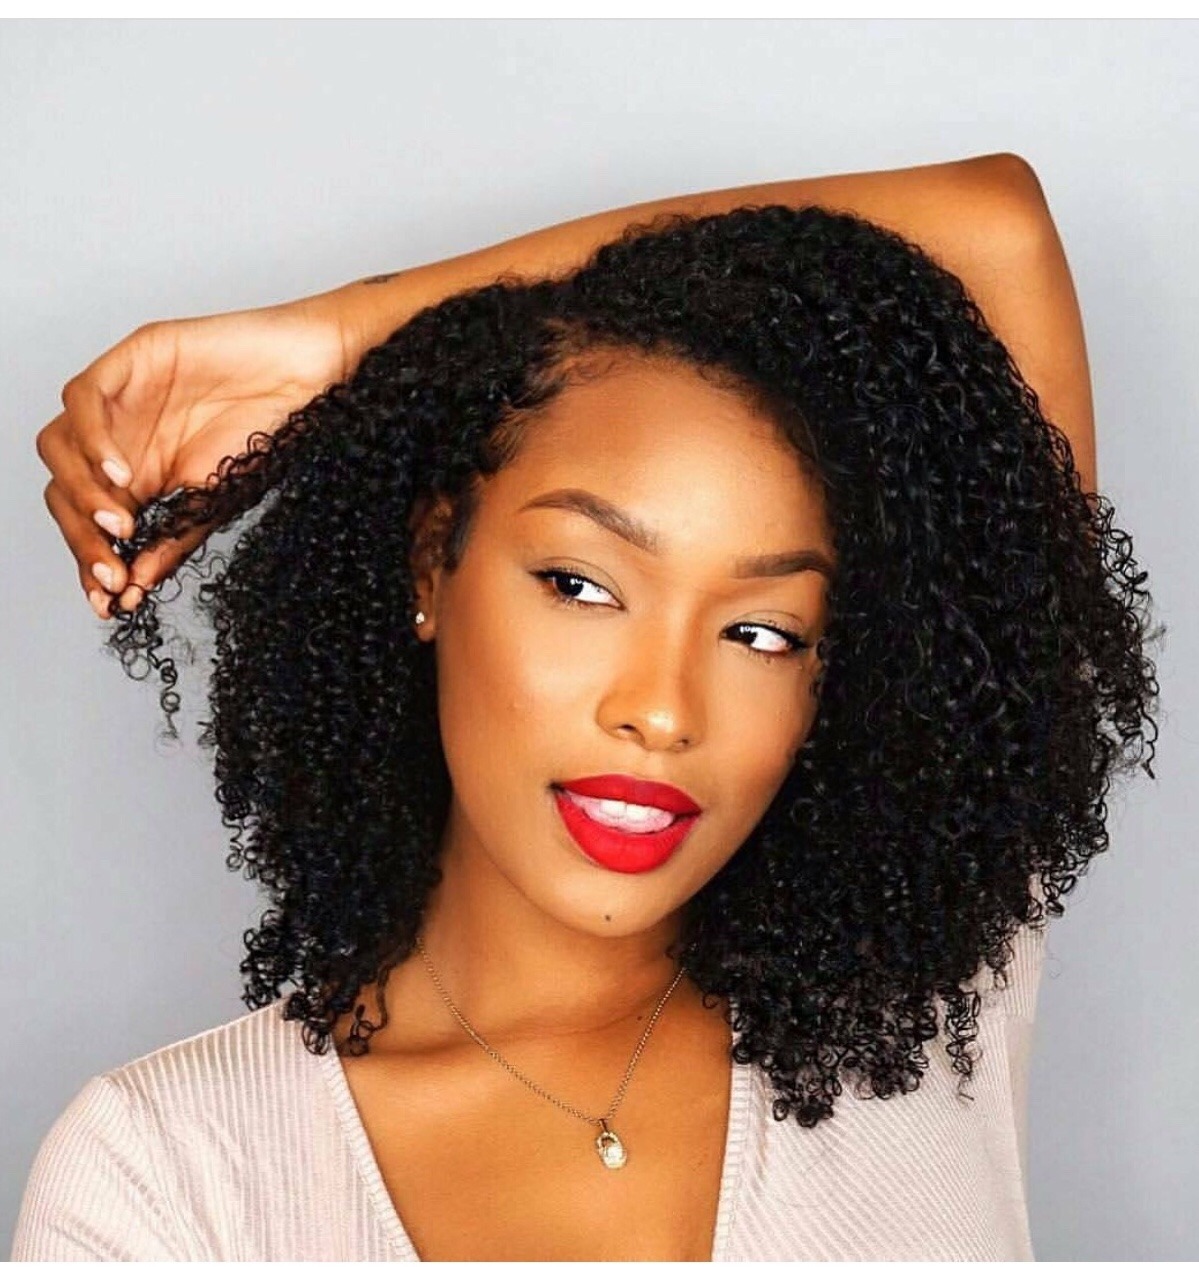 5 BEST CLIP IN HAIR EXTENSIONS FOR BLACK WOMEN 2021